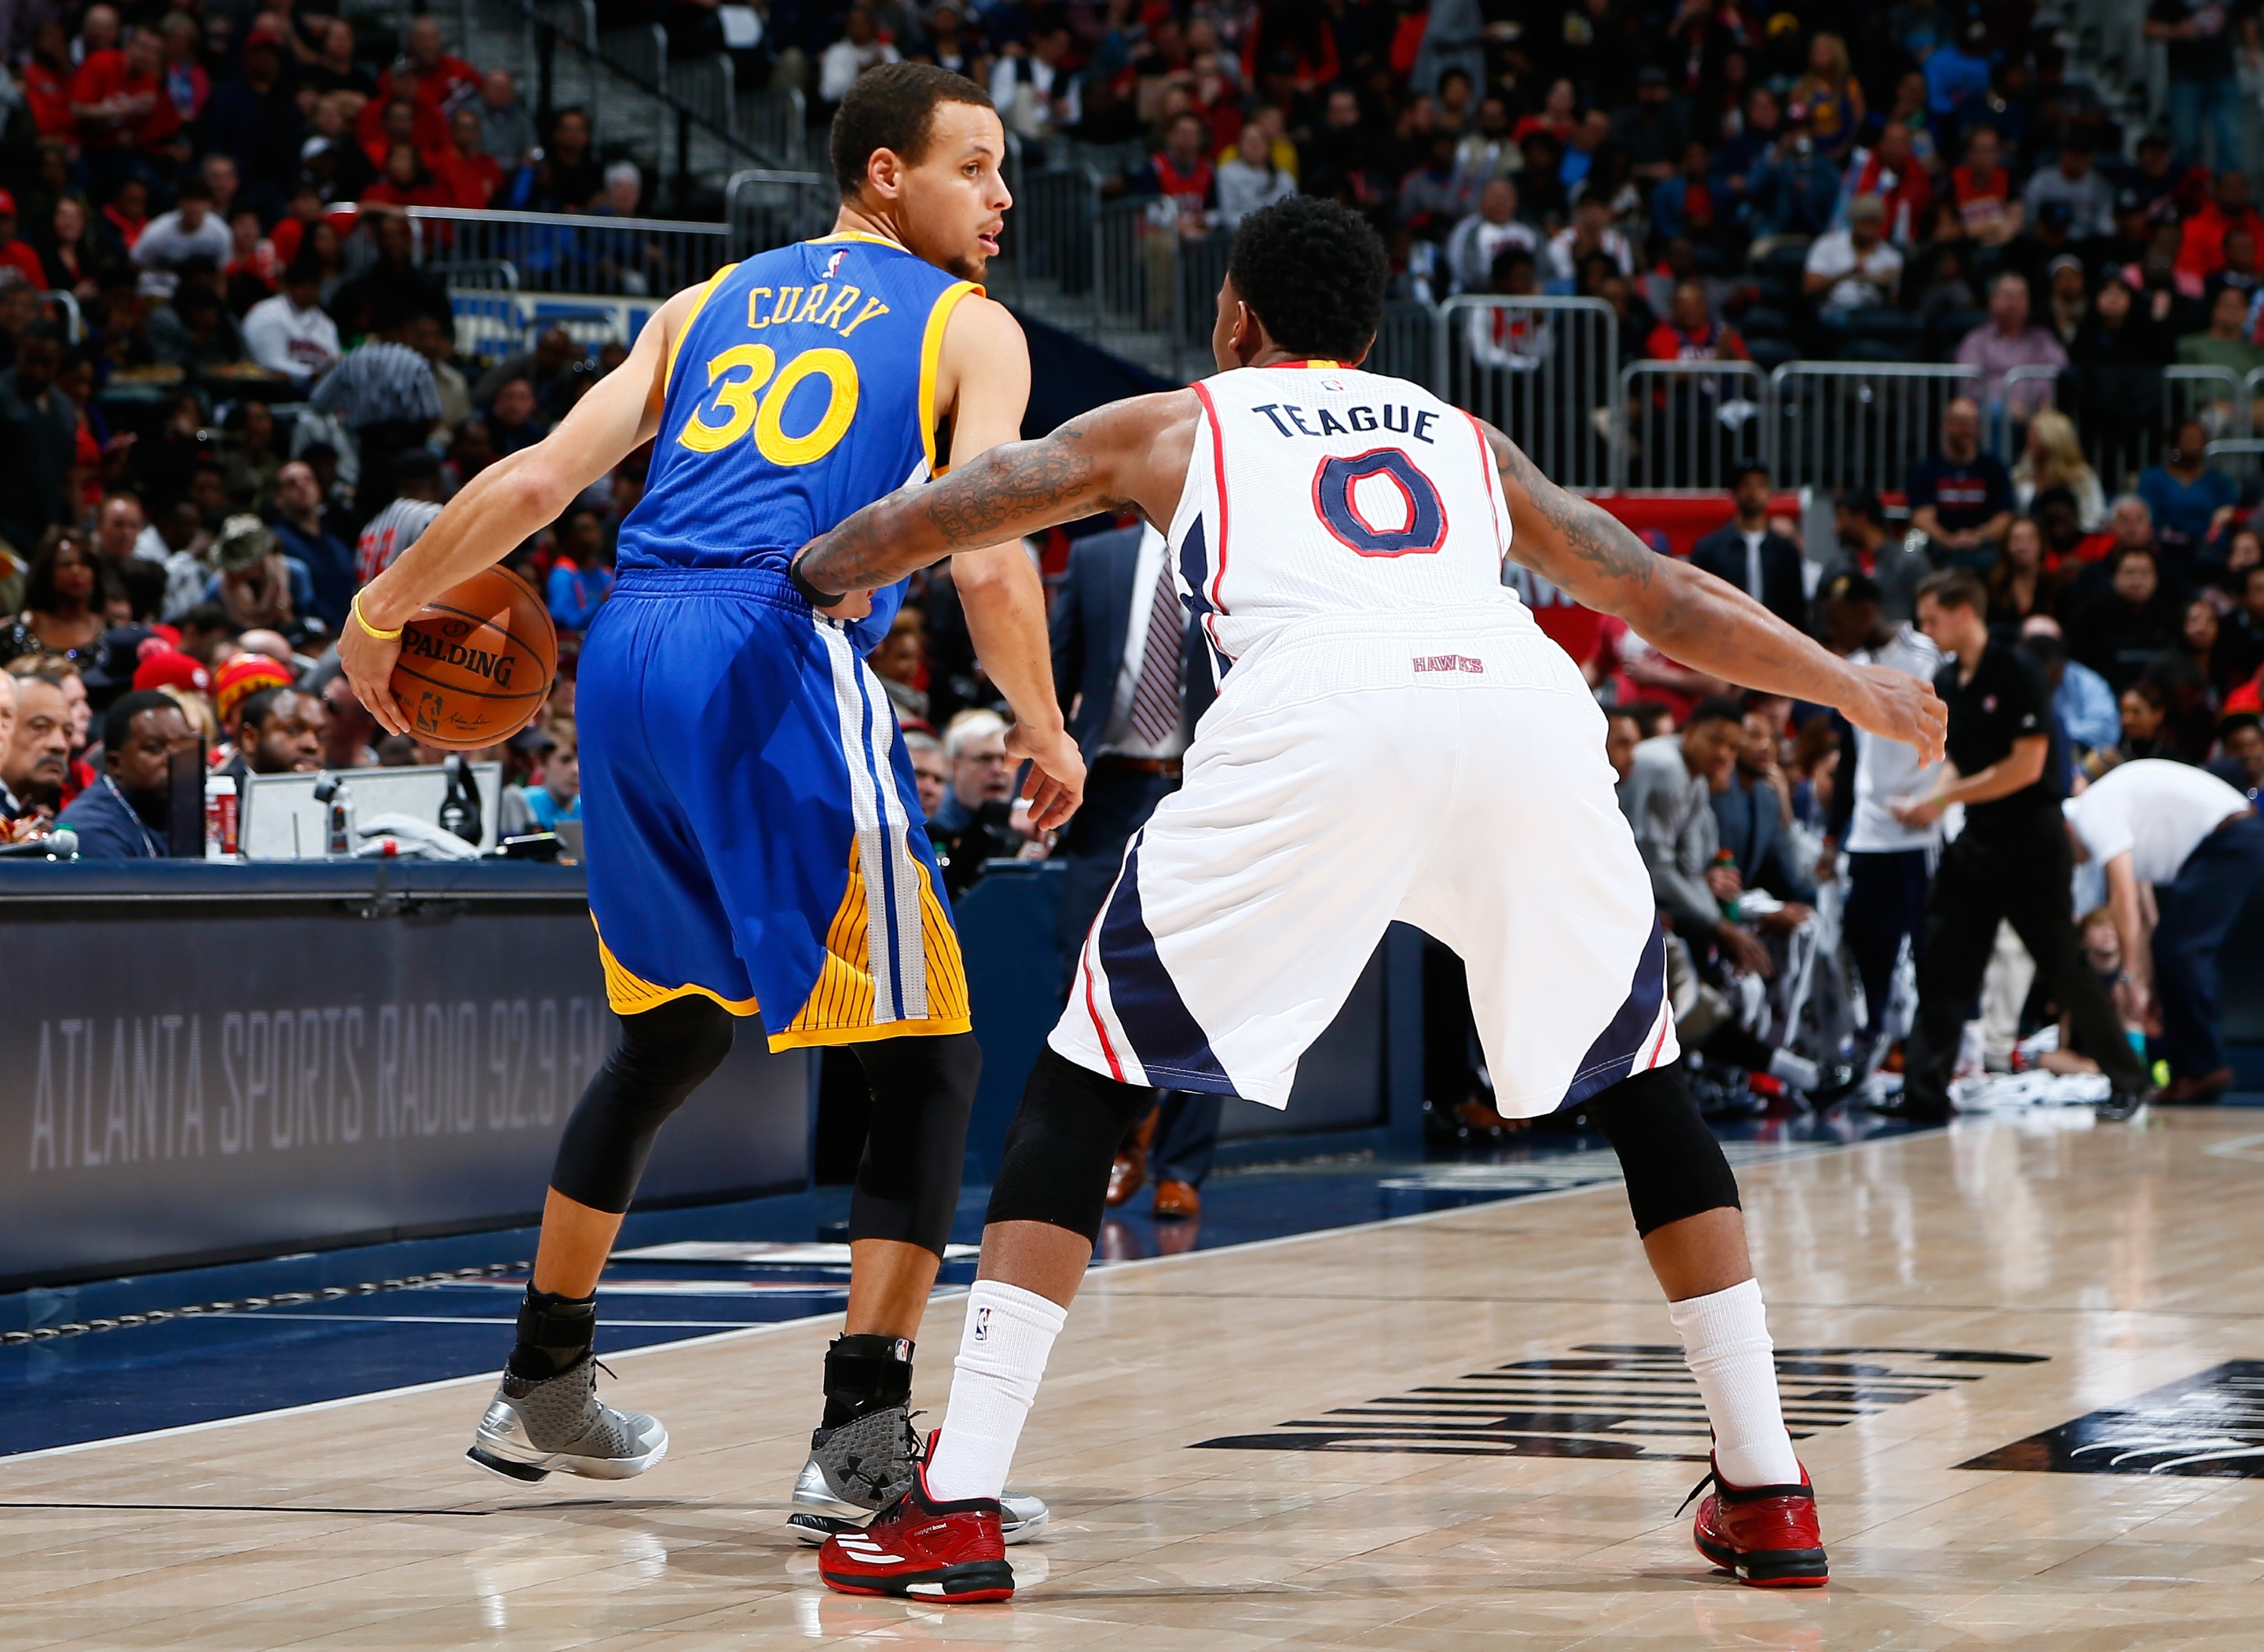 Can Jeff Teague and company take away Stephen Curry's room to operate? (Kevin C. Cox/Getty Images)